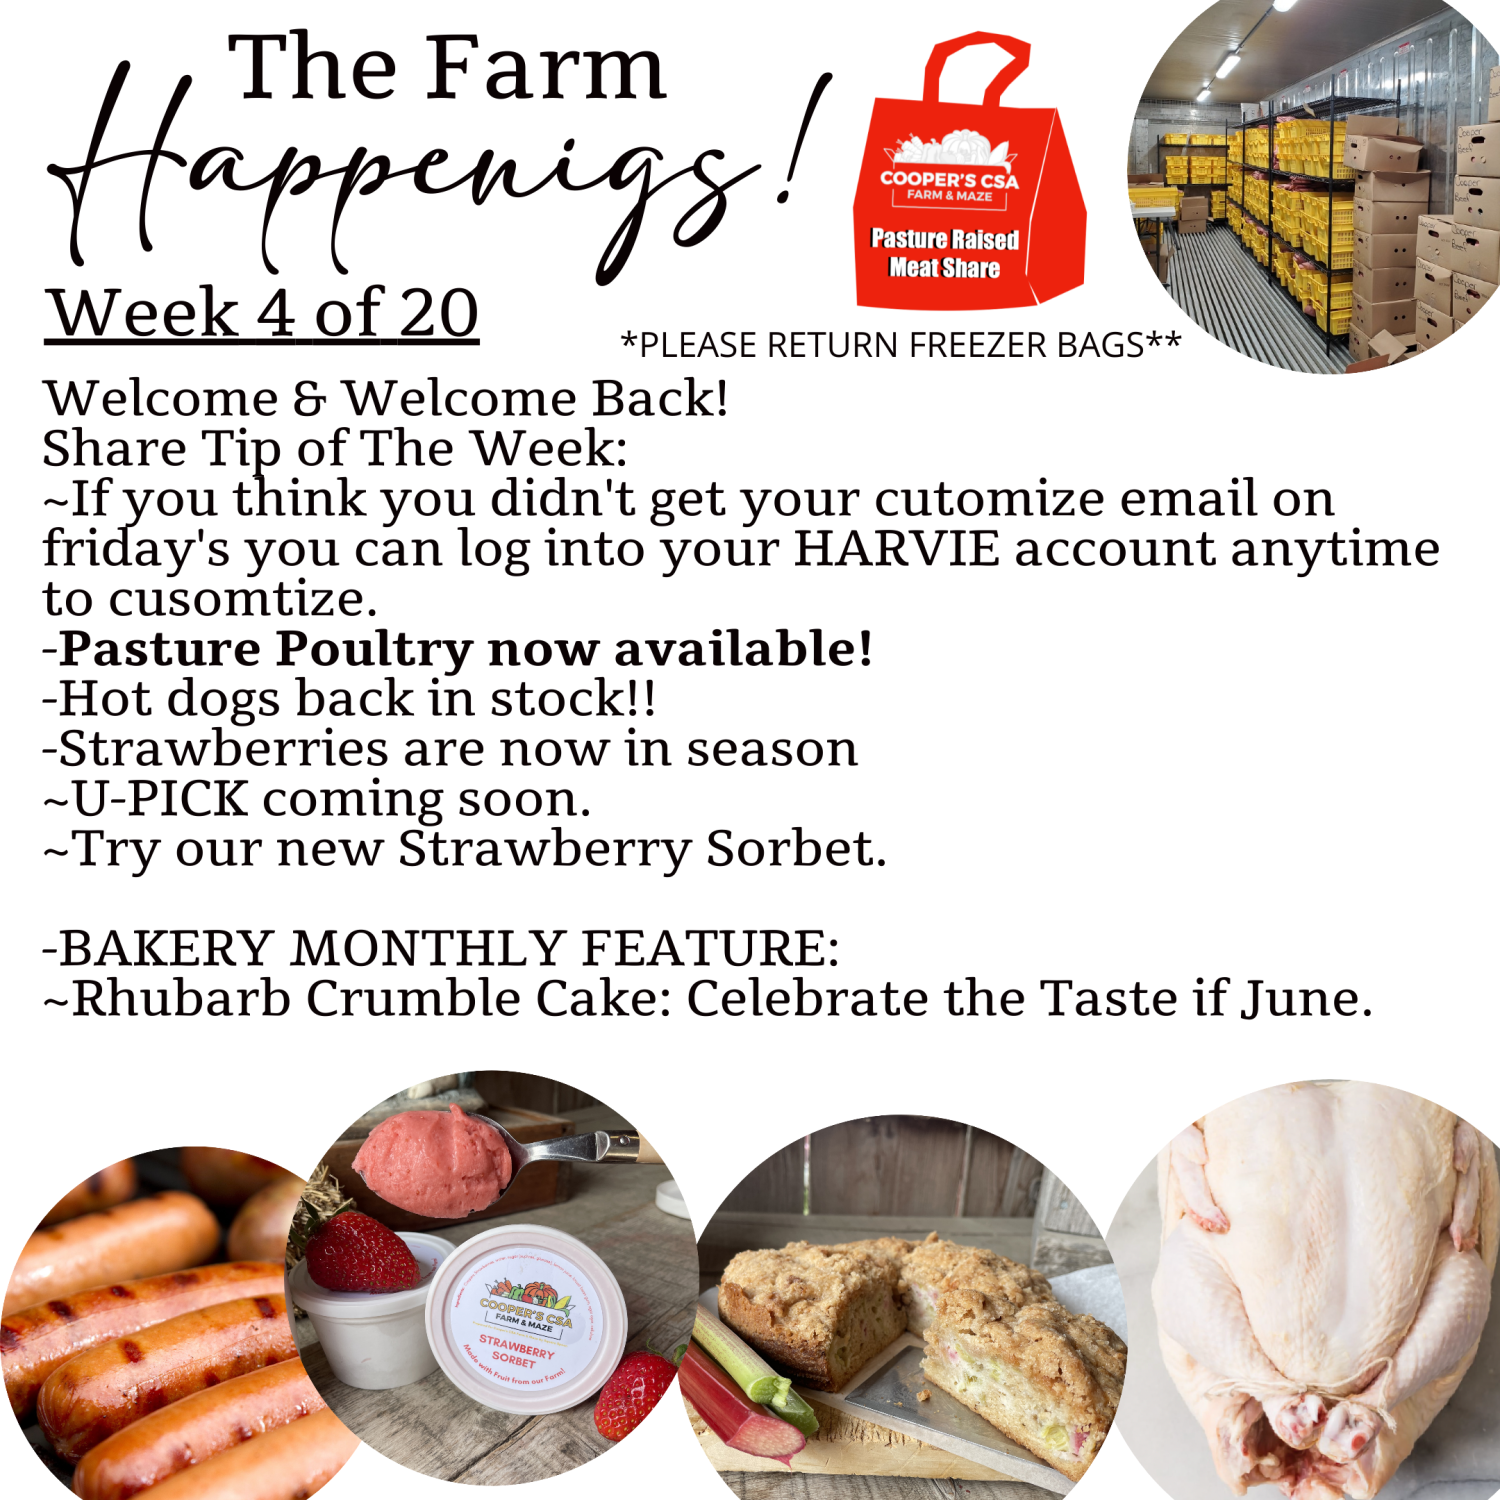 Previous Happening: "Pasture Meat Shares"-Coopers CSA Farm Farm Happenings Week 4 of 20